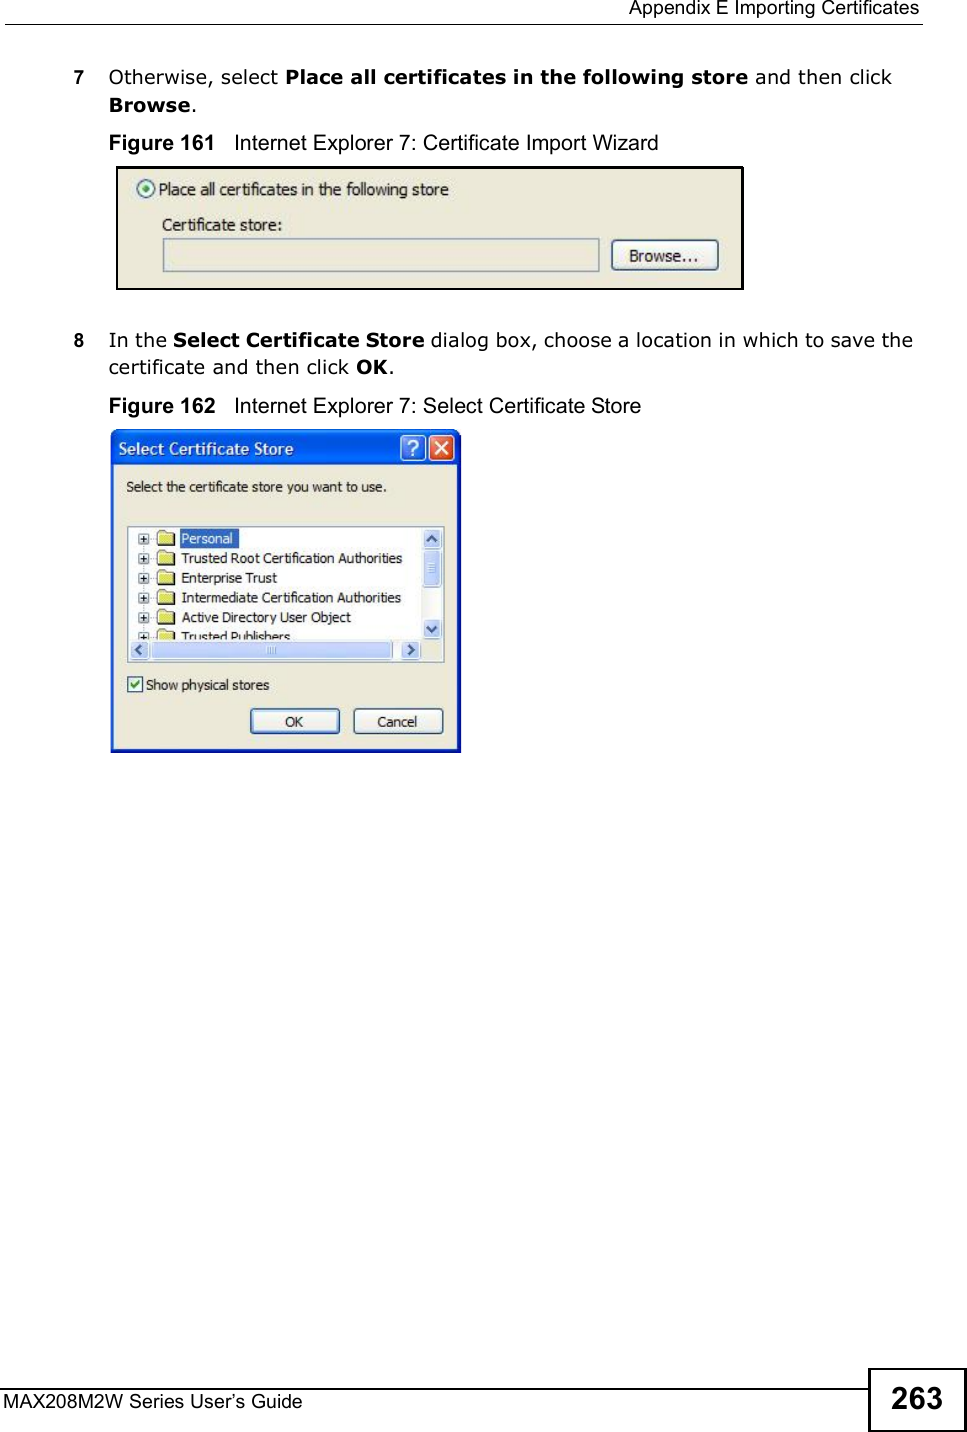  Appendix EImporting CertificatesMAX208M2W Series User s Guide 2637Otherwise, select Place all certificates in the following store and then click Browse.Figure 161   Internet Explorer 7: Certificate Import Wizard8In the Select Certificate Store dialog box, choose a location in which to save the certificate and then click OK.Figure 162   Internet Explorer 7: Select Certificate Store